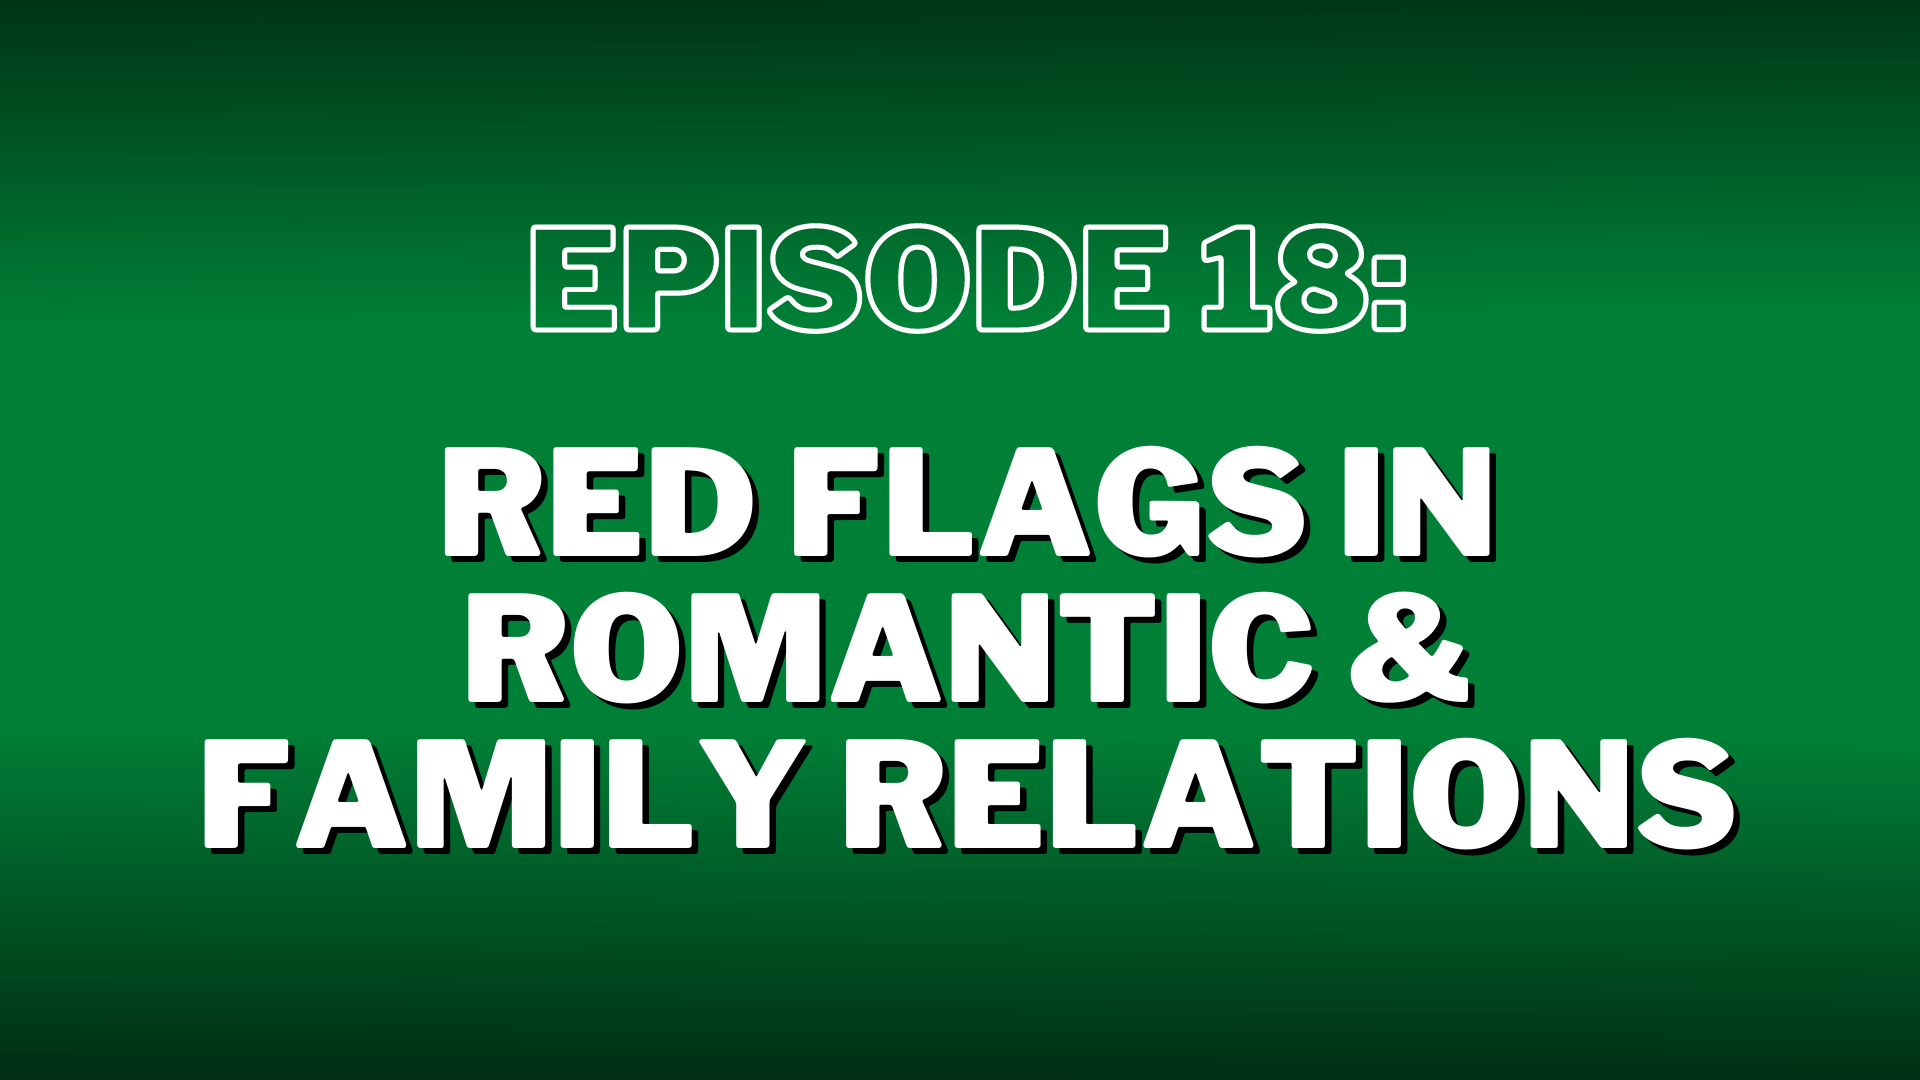 Episode 18. “Red Flags in Romantic & Family Relationships” – Show Notes